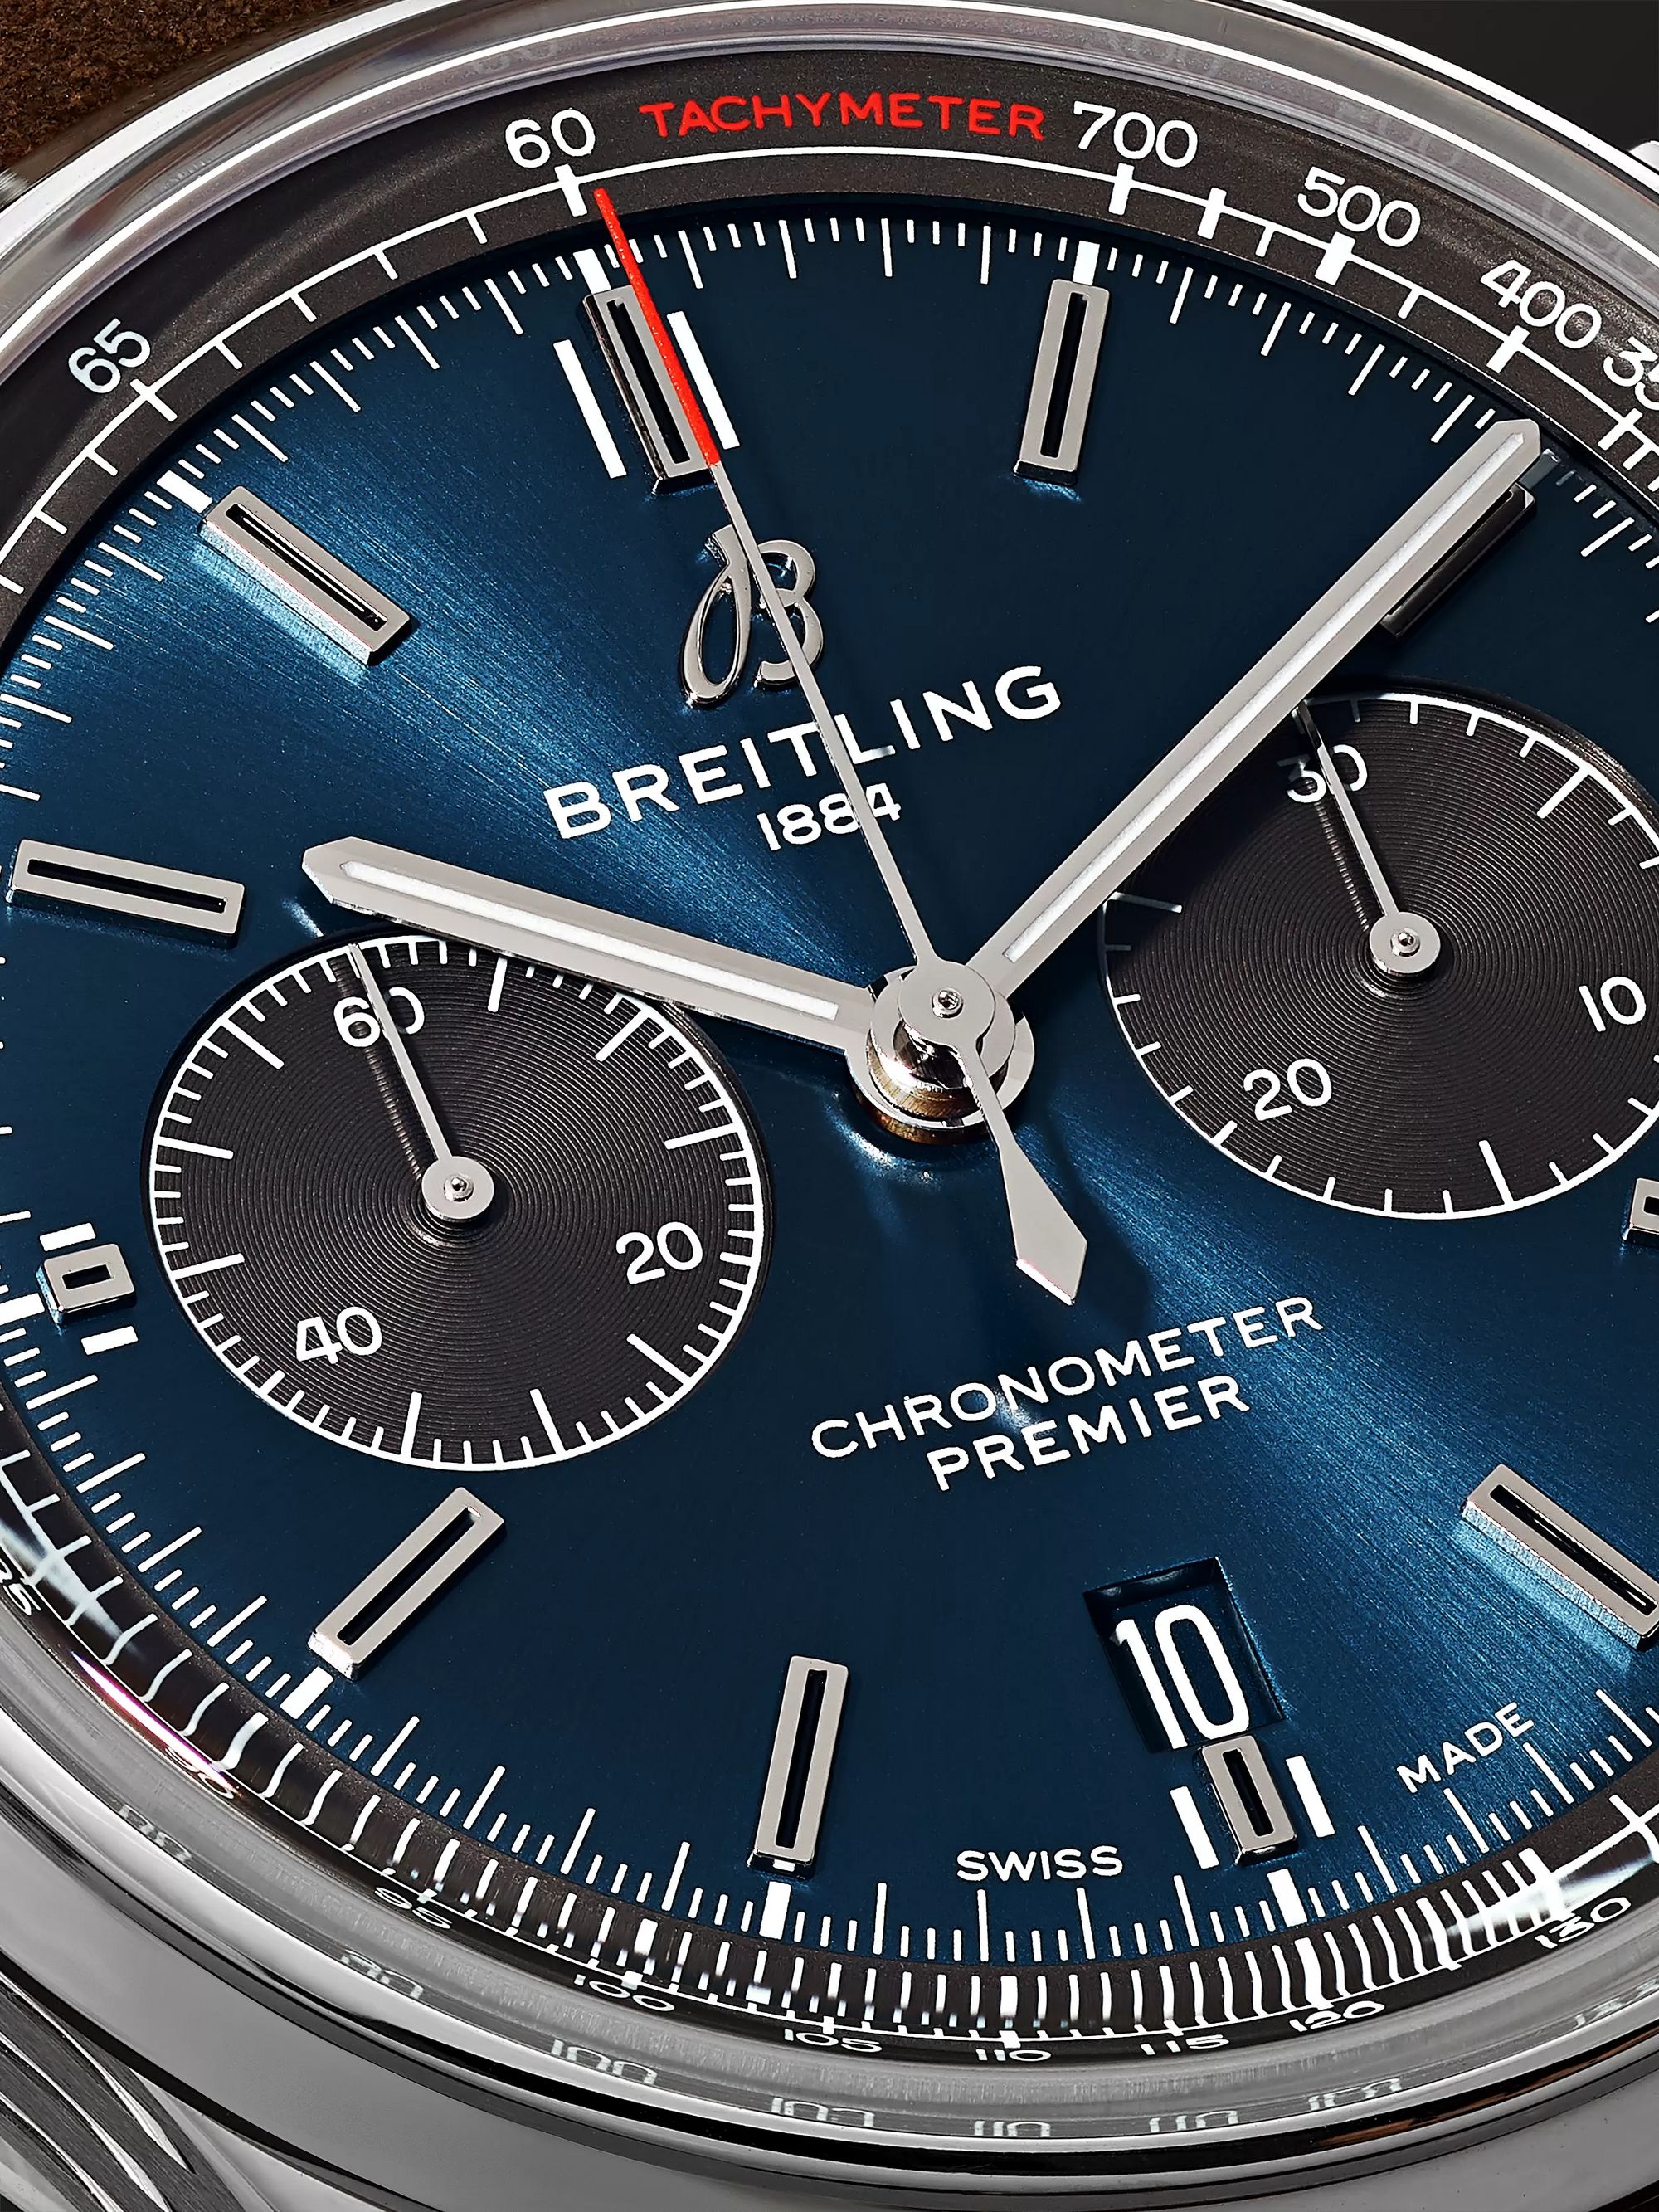 Breitling Premier B01 Automatic Chronograph 42mm Stainless Steel and Nubuck Watch, Ref. No. AB0118221G1X1